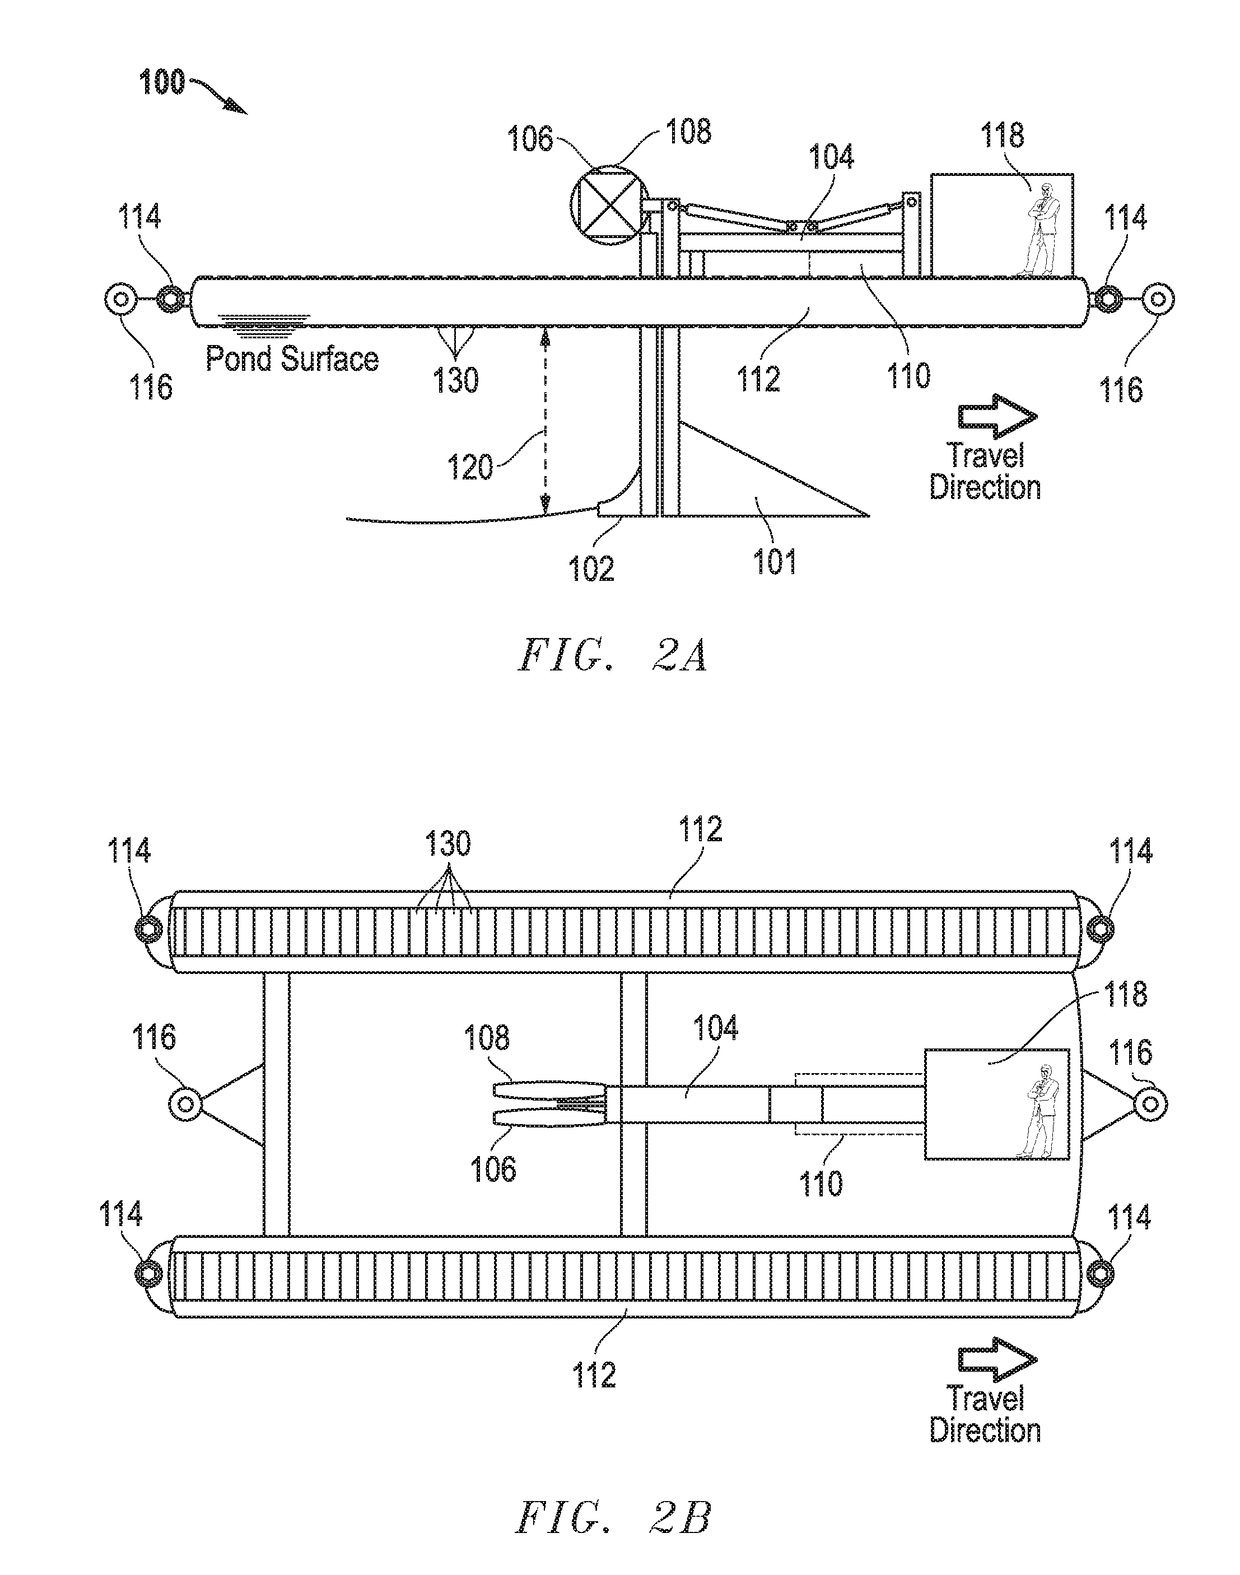 Device for the installation of vacuum consolidation dewatering horizontal drains for dewatering sludge ponds